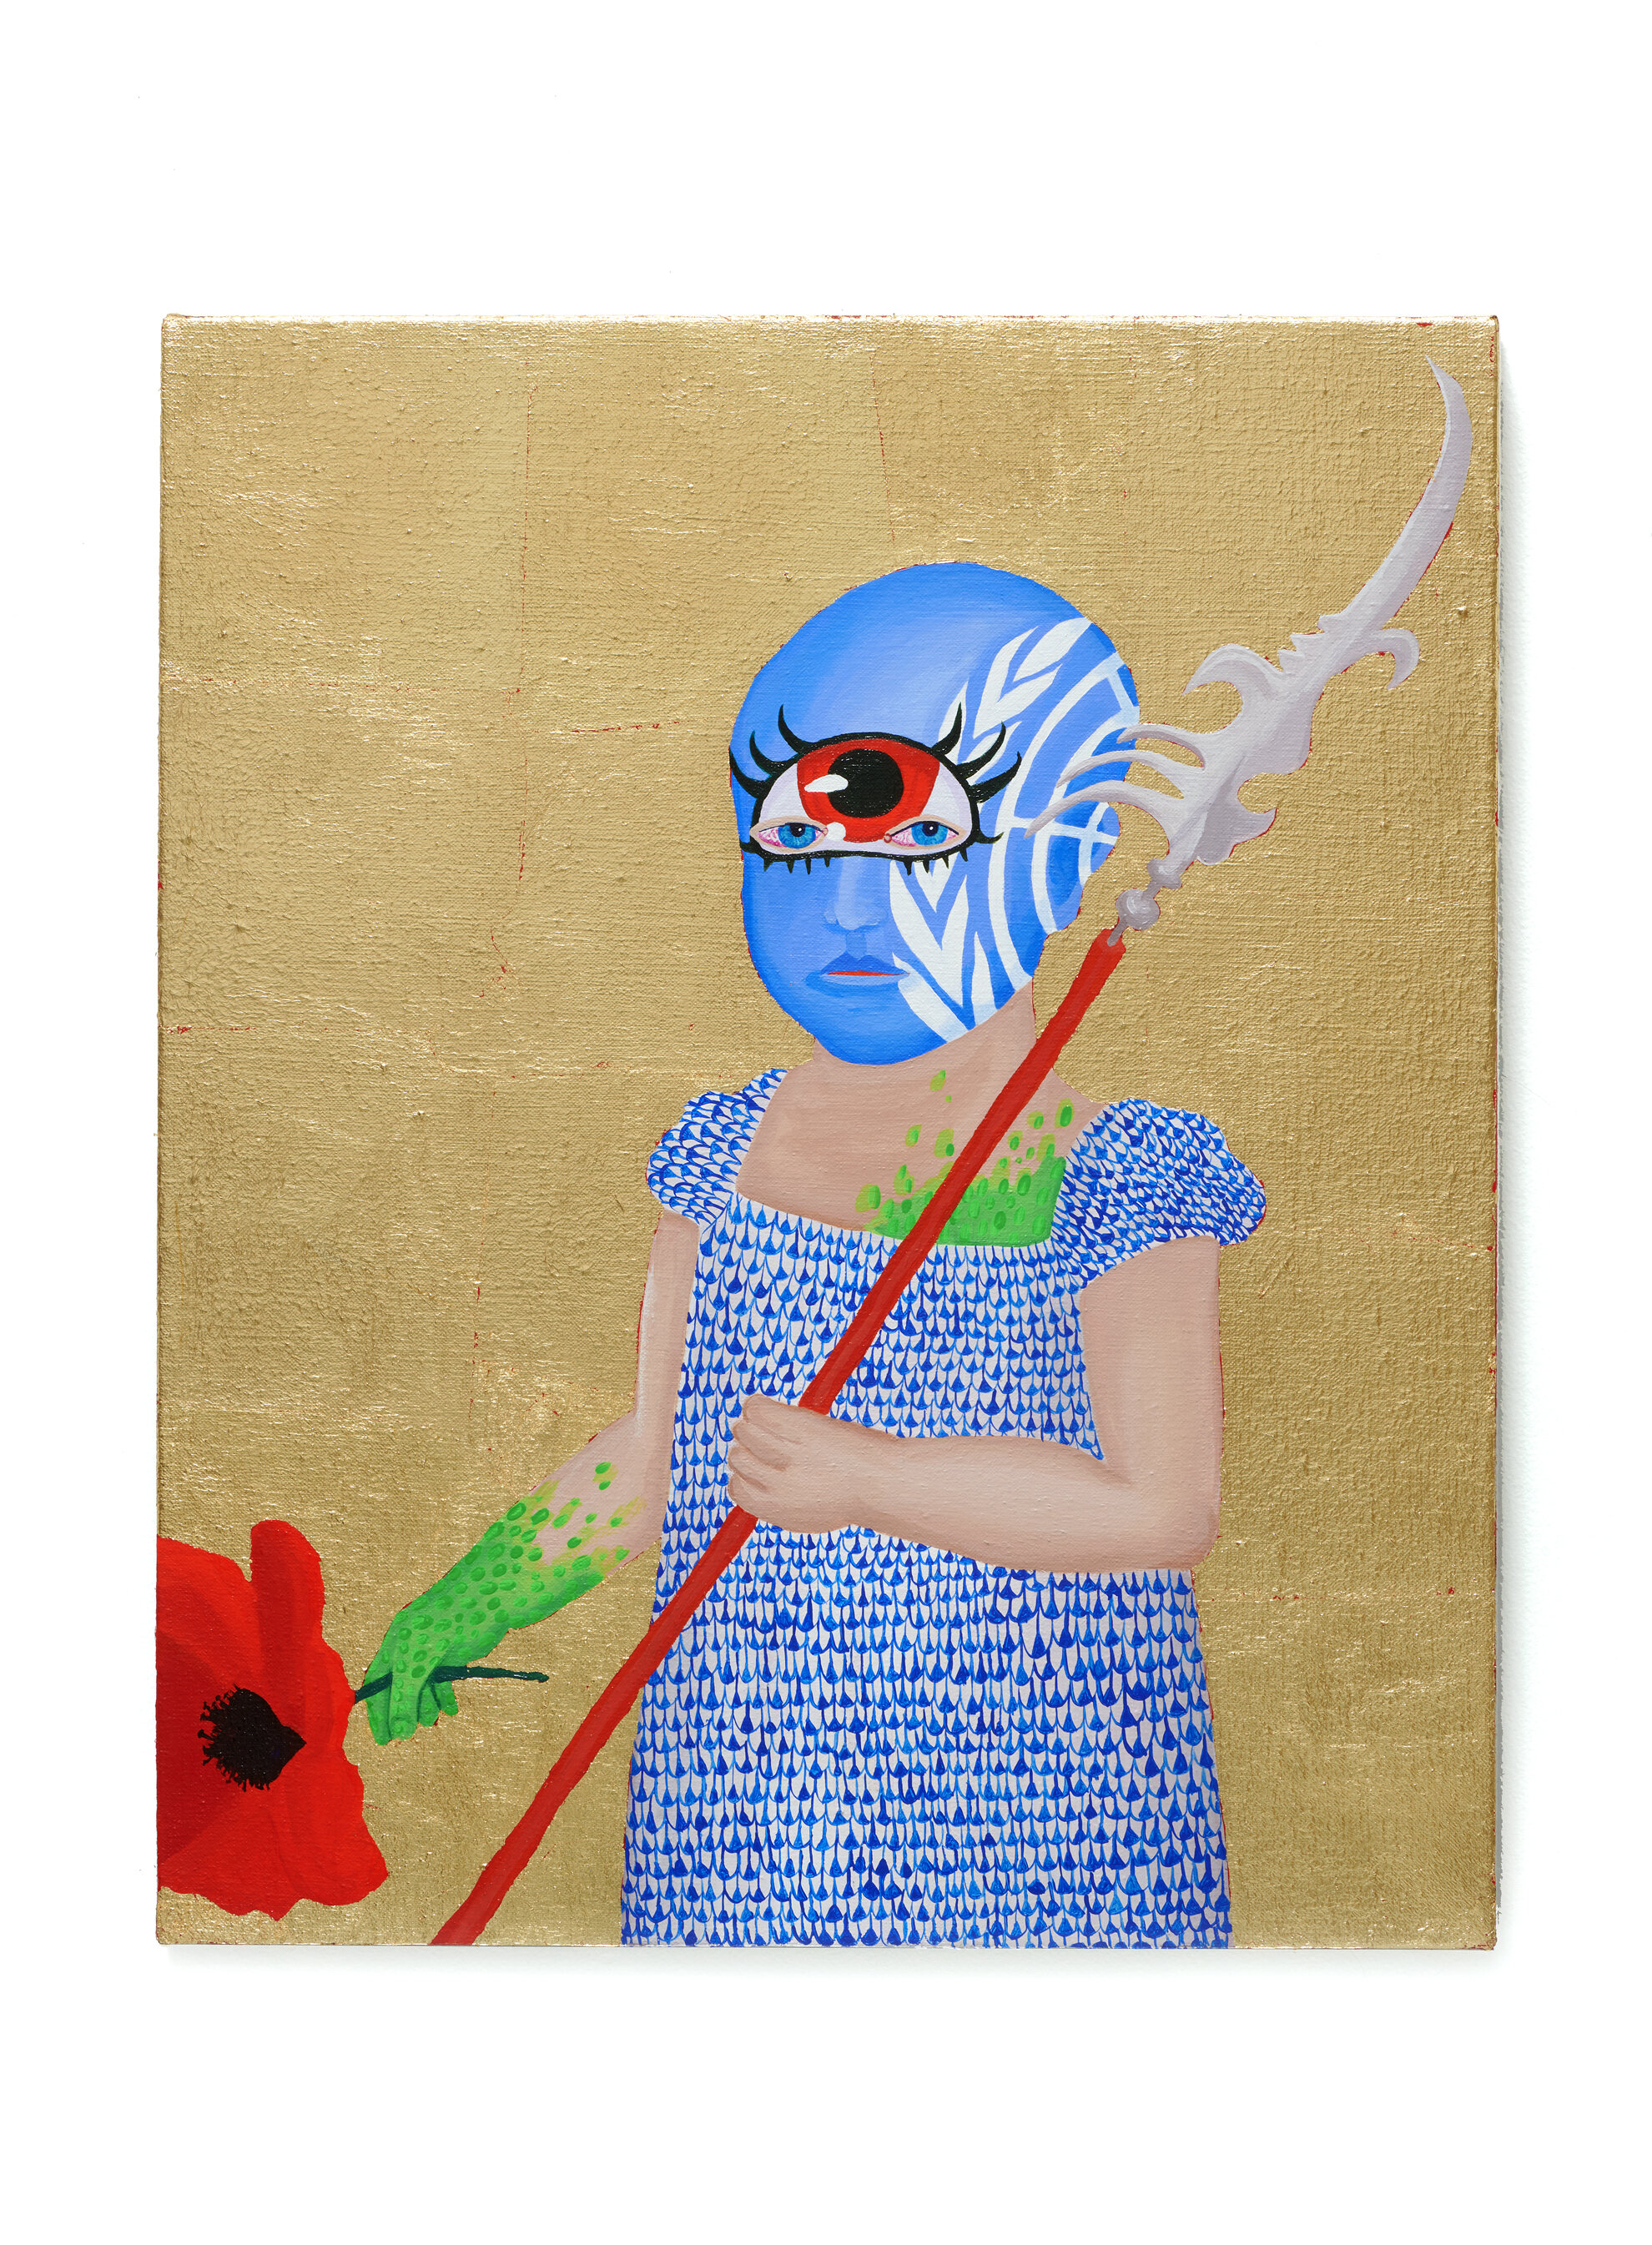   Girl with Poppy (All We Own We Owe),  2019  18 x 22 x 1.5 inches (45.72 x 55.88 x 3.81 cm.)  Acrylic and gold leaf on linen  Private collection 